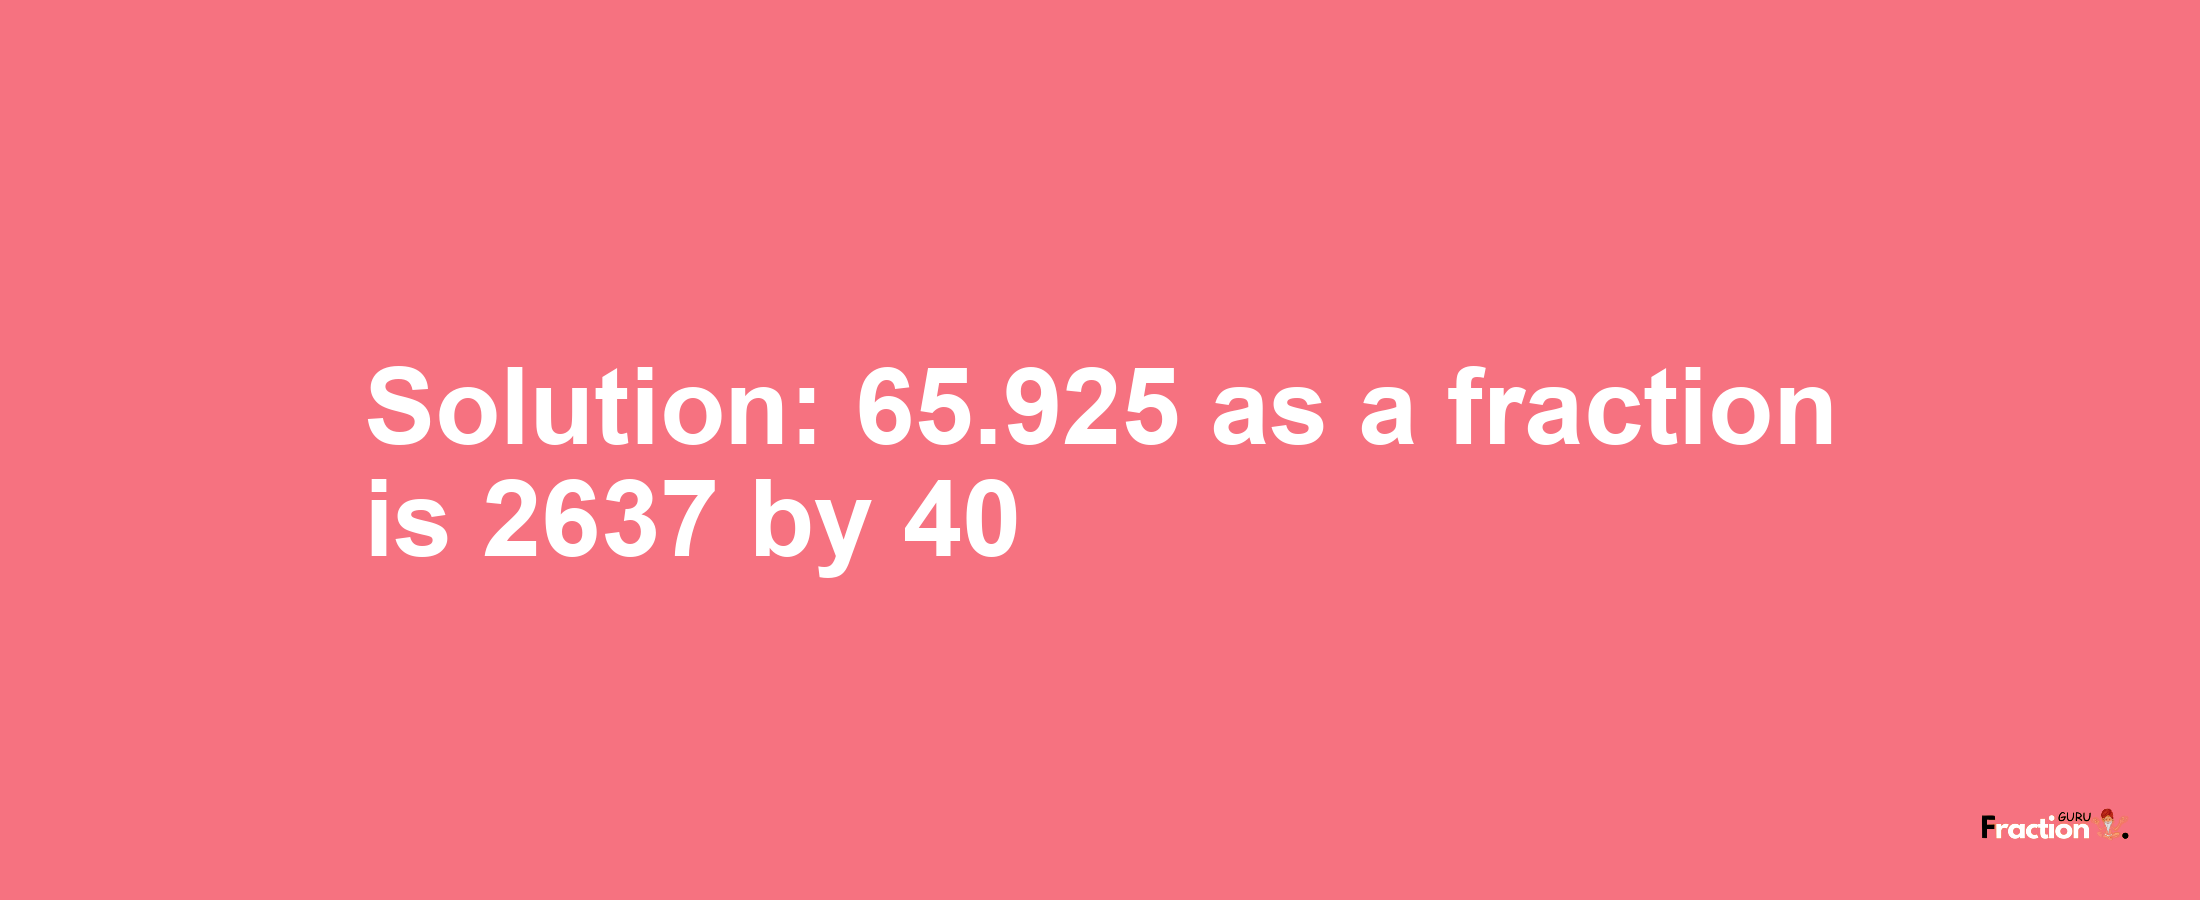 Solution:65.925 as a fraction is 2637/40